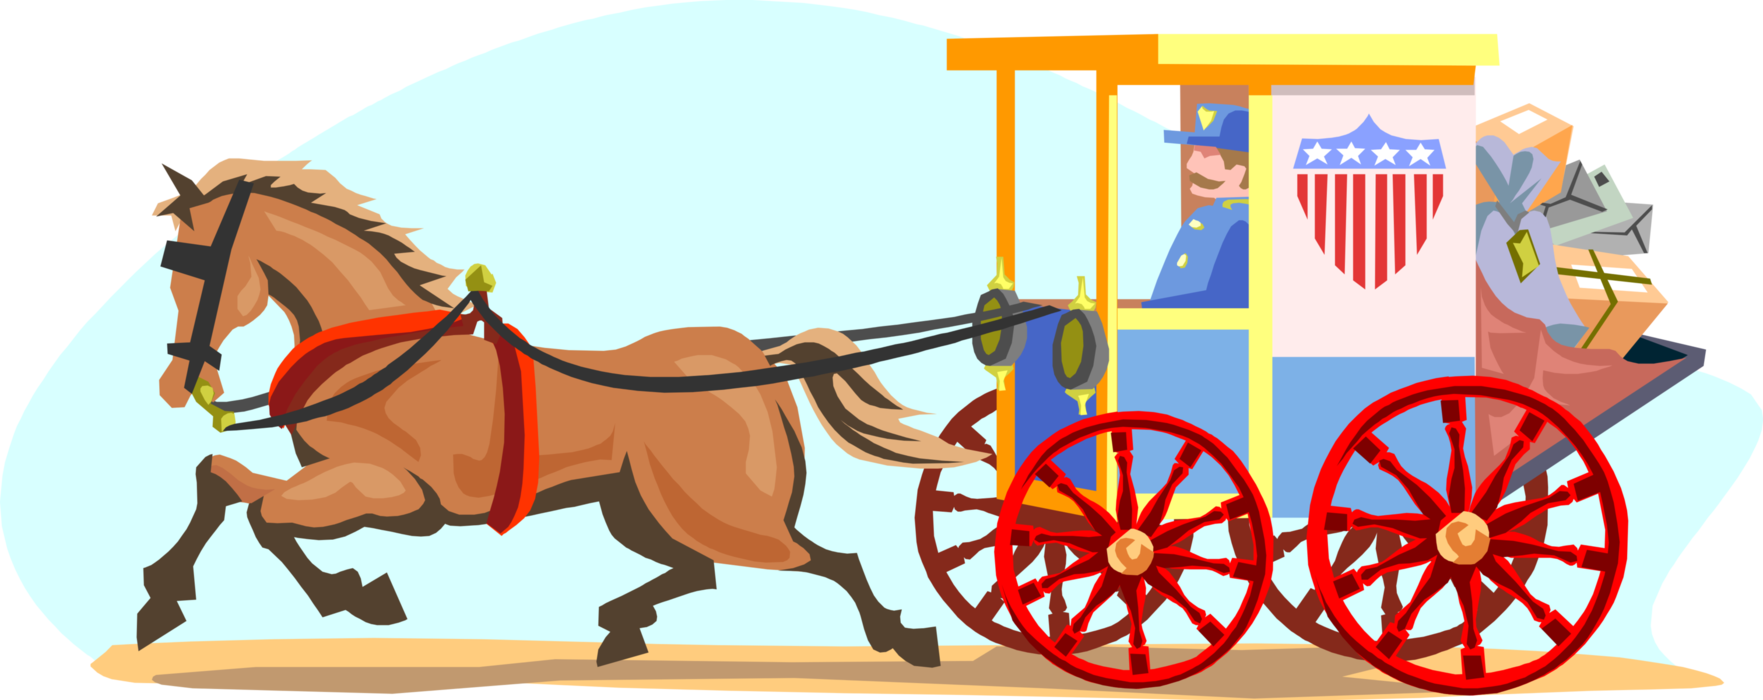 Vector Illustration of Horse-Drawn U.S. Post Office Mail Carriage with Parcels and Packages